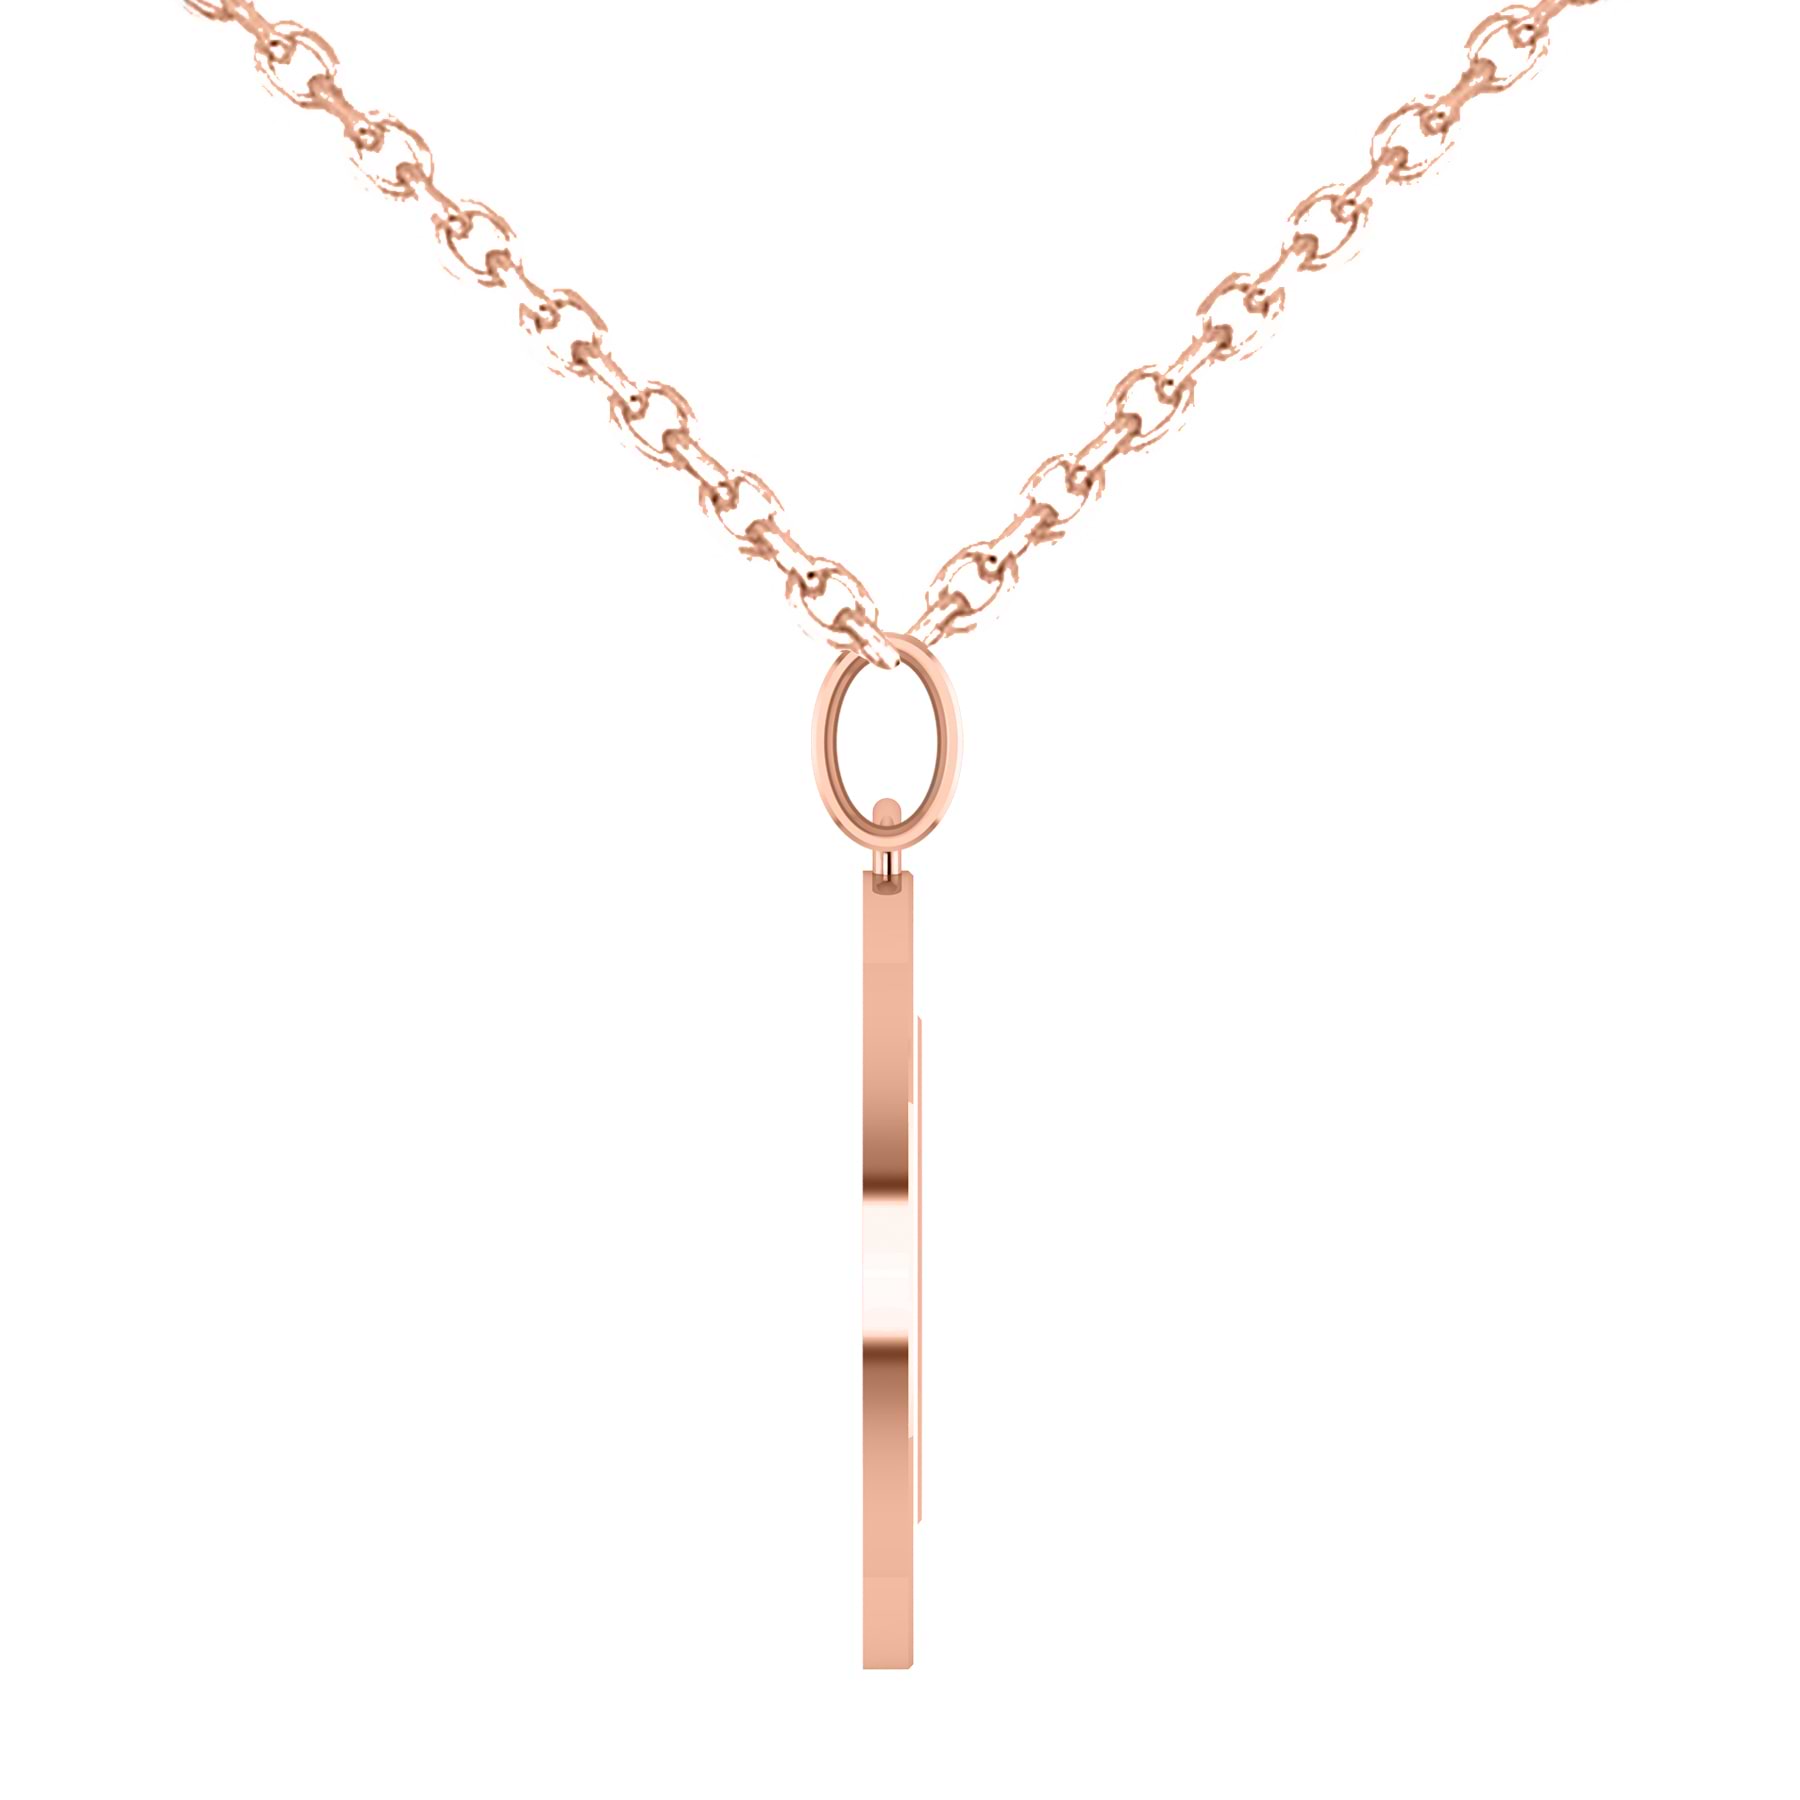 Large Cryptocurrency Bitcoin Pendant Necklace 14k Rose Gold